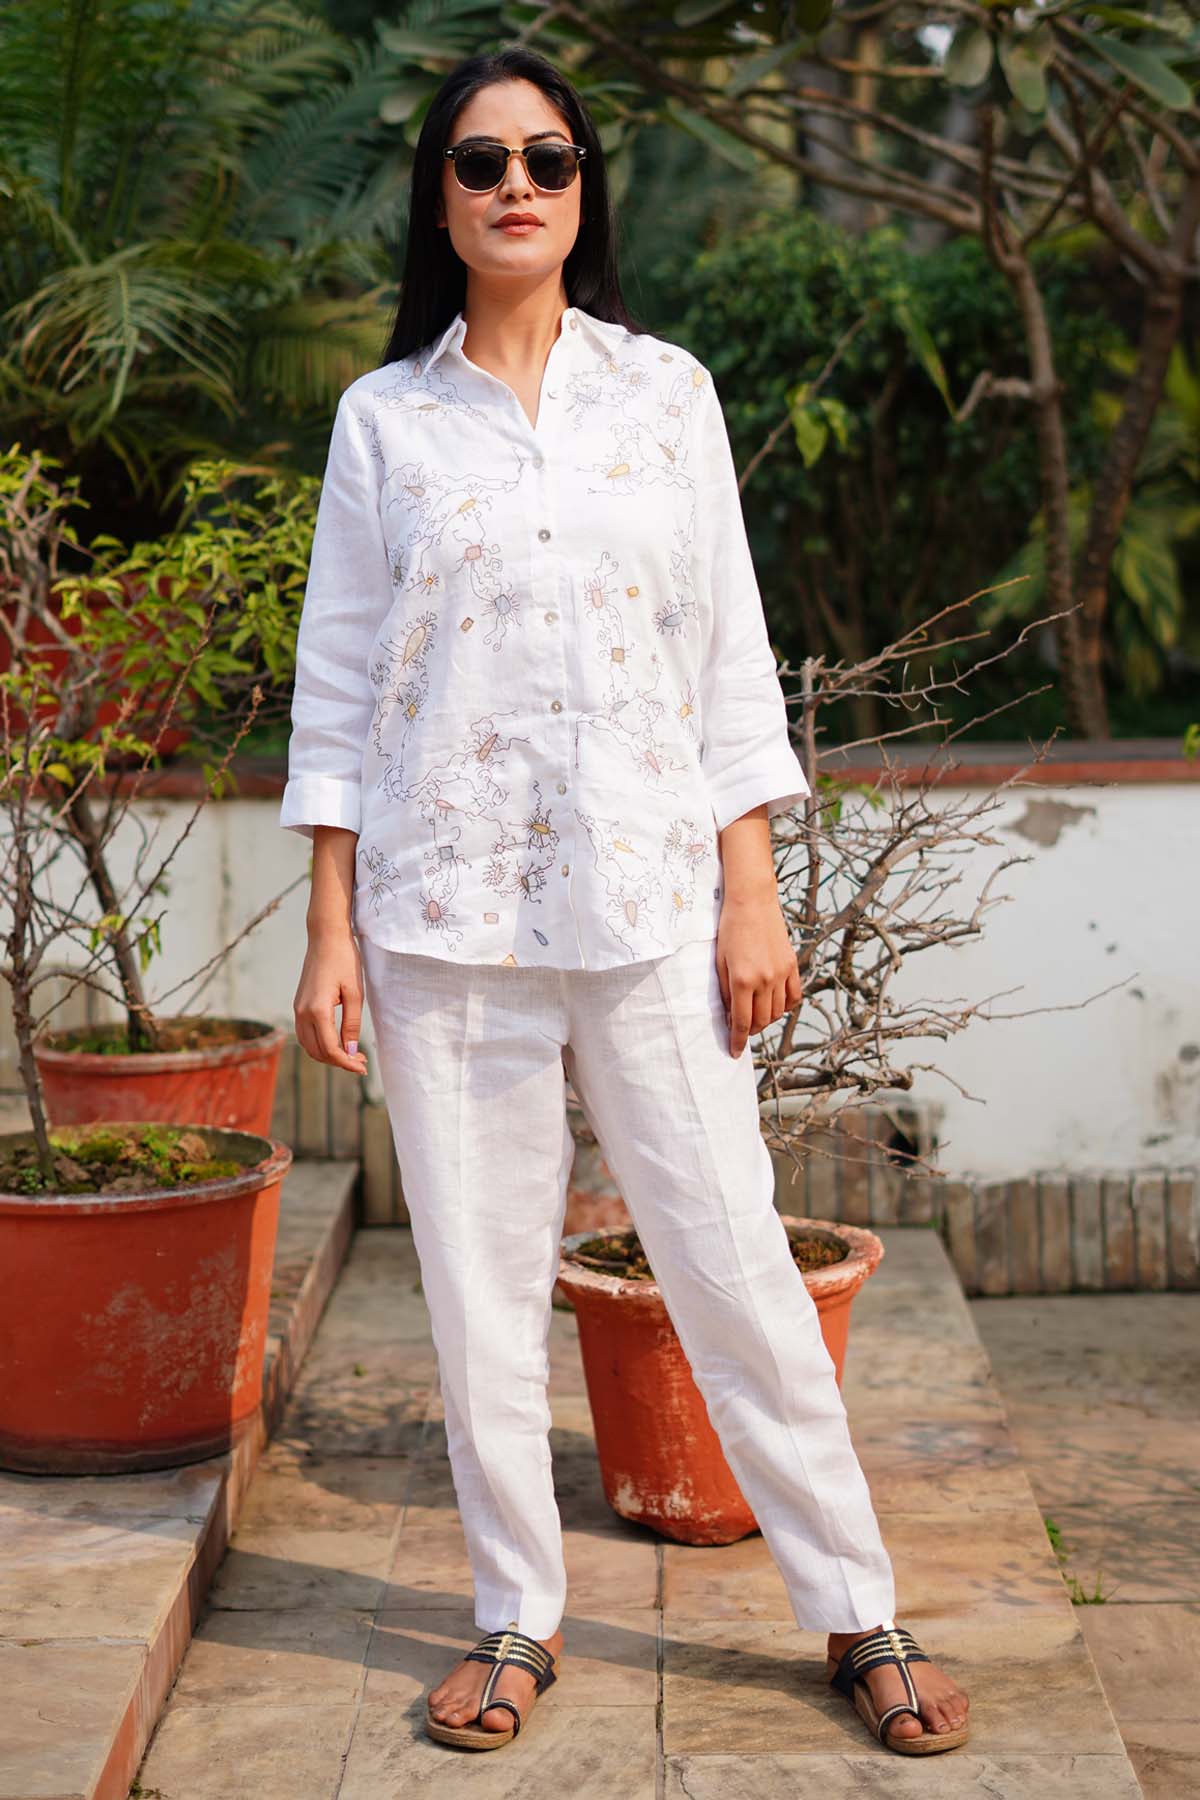 Designer Linen Bloom White Linen Top with Playful Scribble Embroidery For Women Online at ScrollnShops